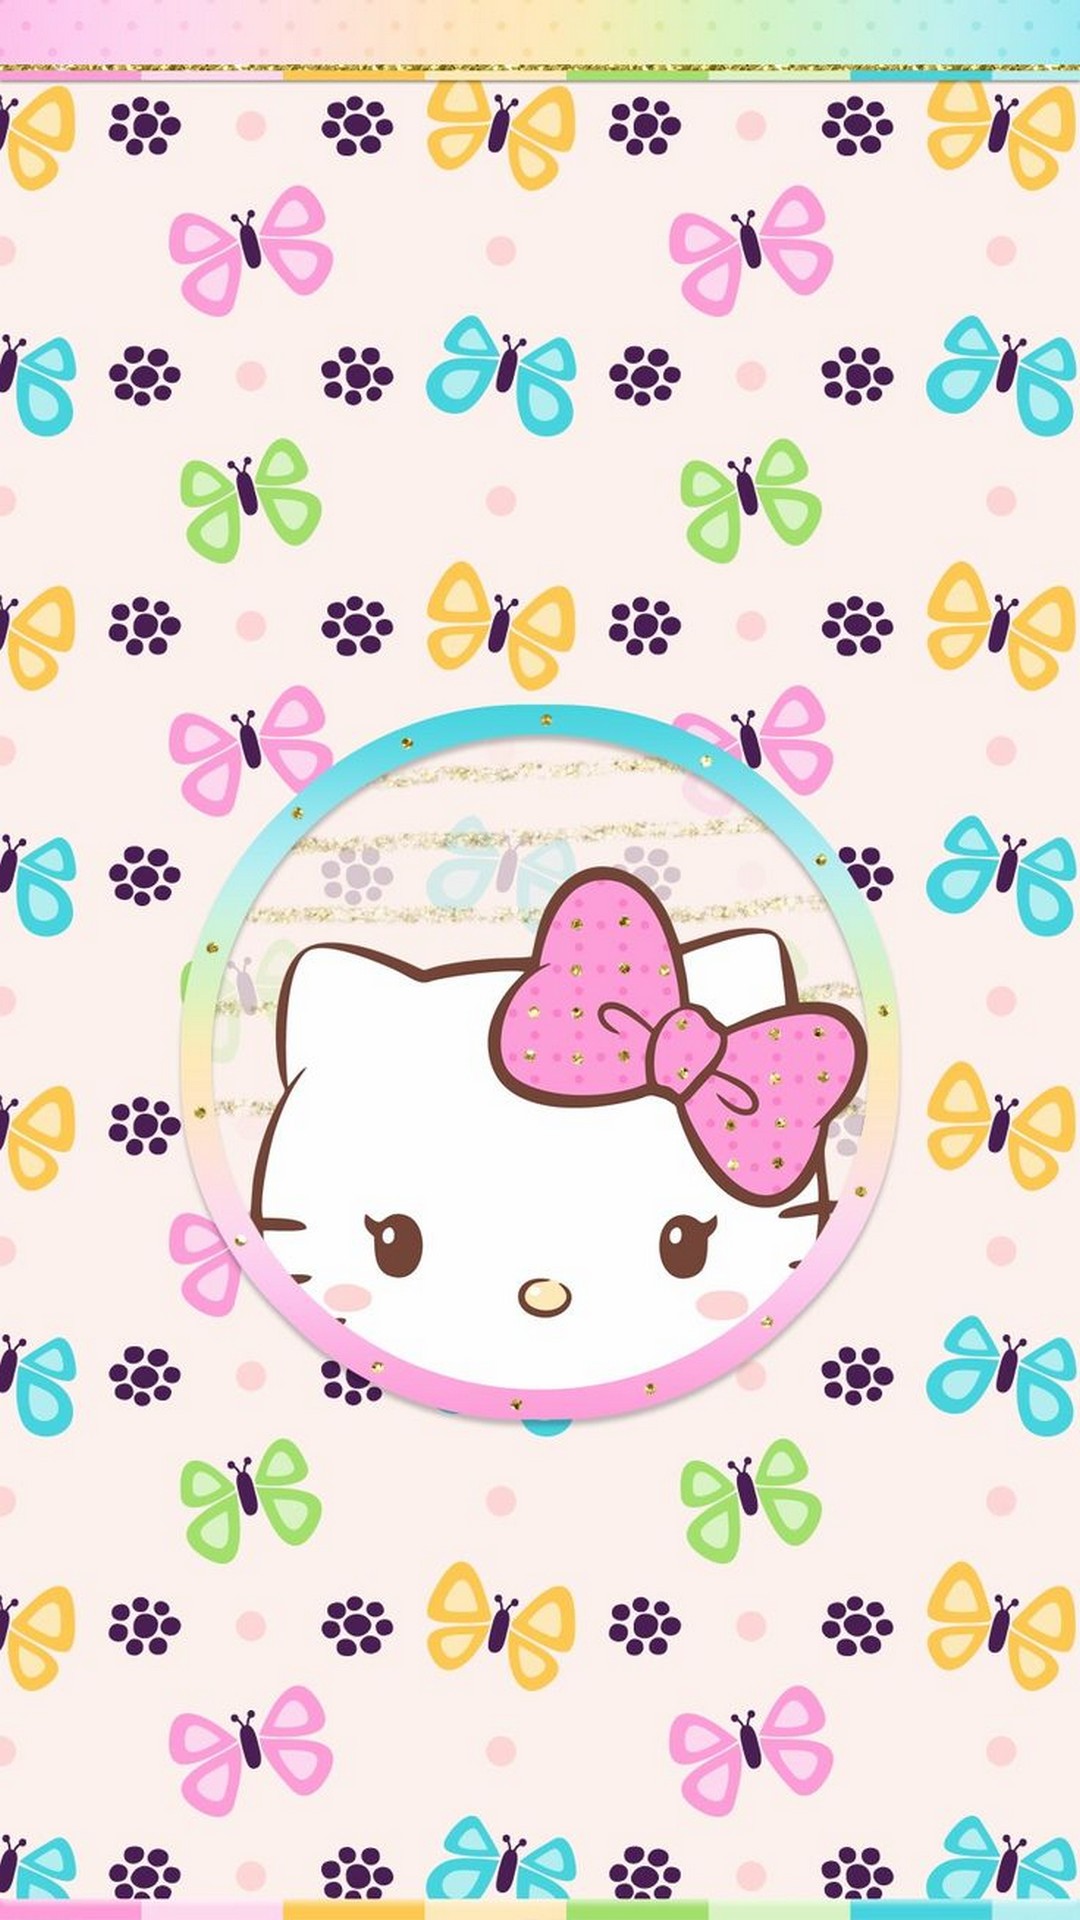 Hello Kitty HD Wallpaper For iPhone with resolution 1080X1920 pixel. You can use this wallpaper as background for your desktop Computer Screensavers, Android or iPhone smartphones